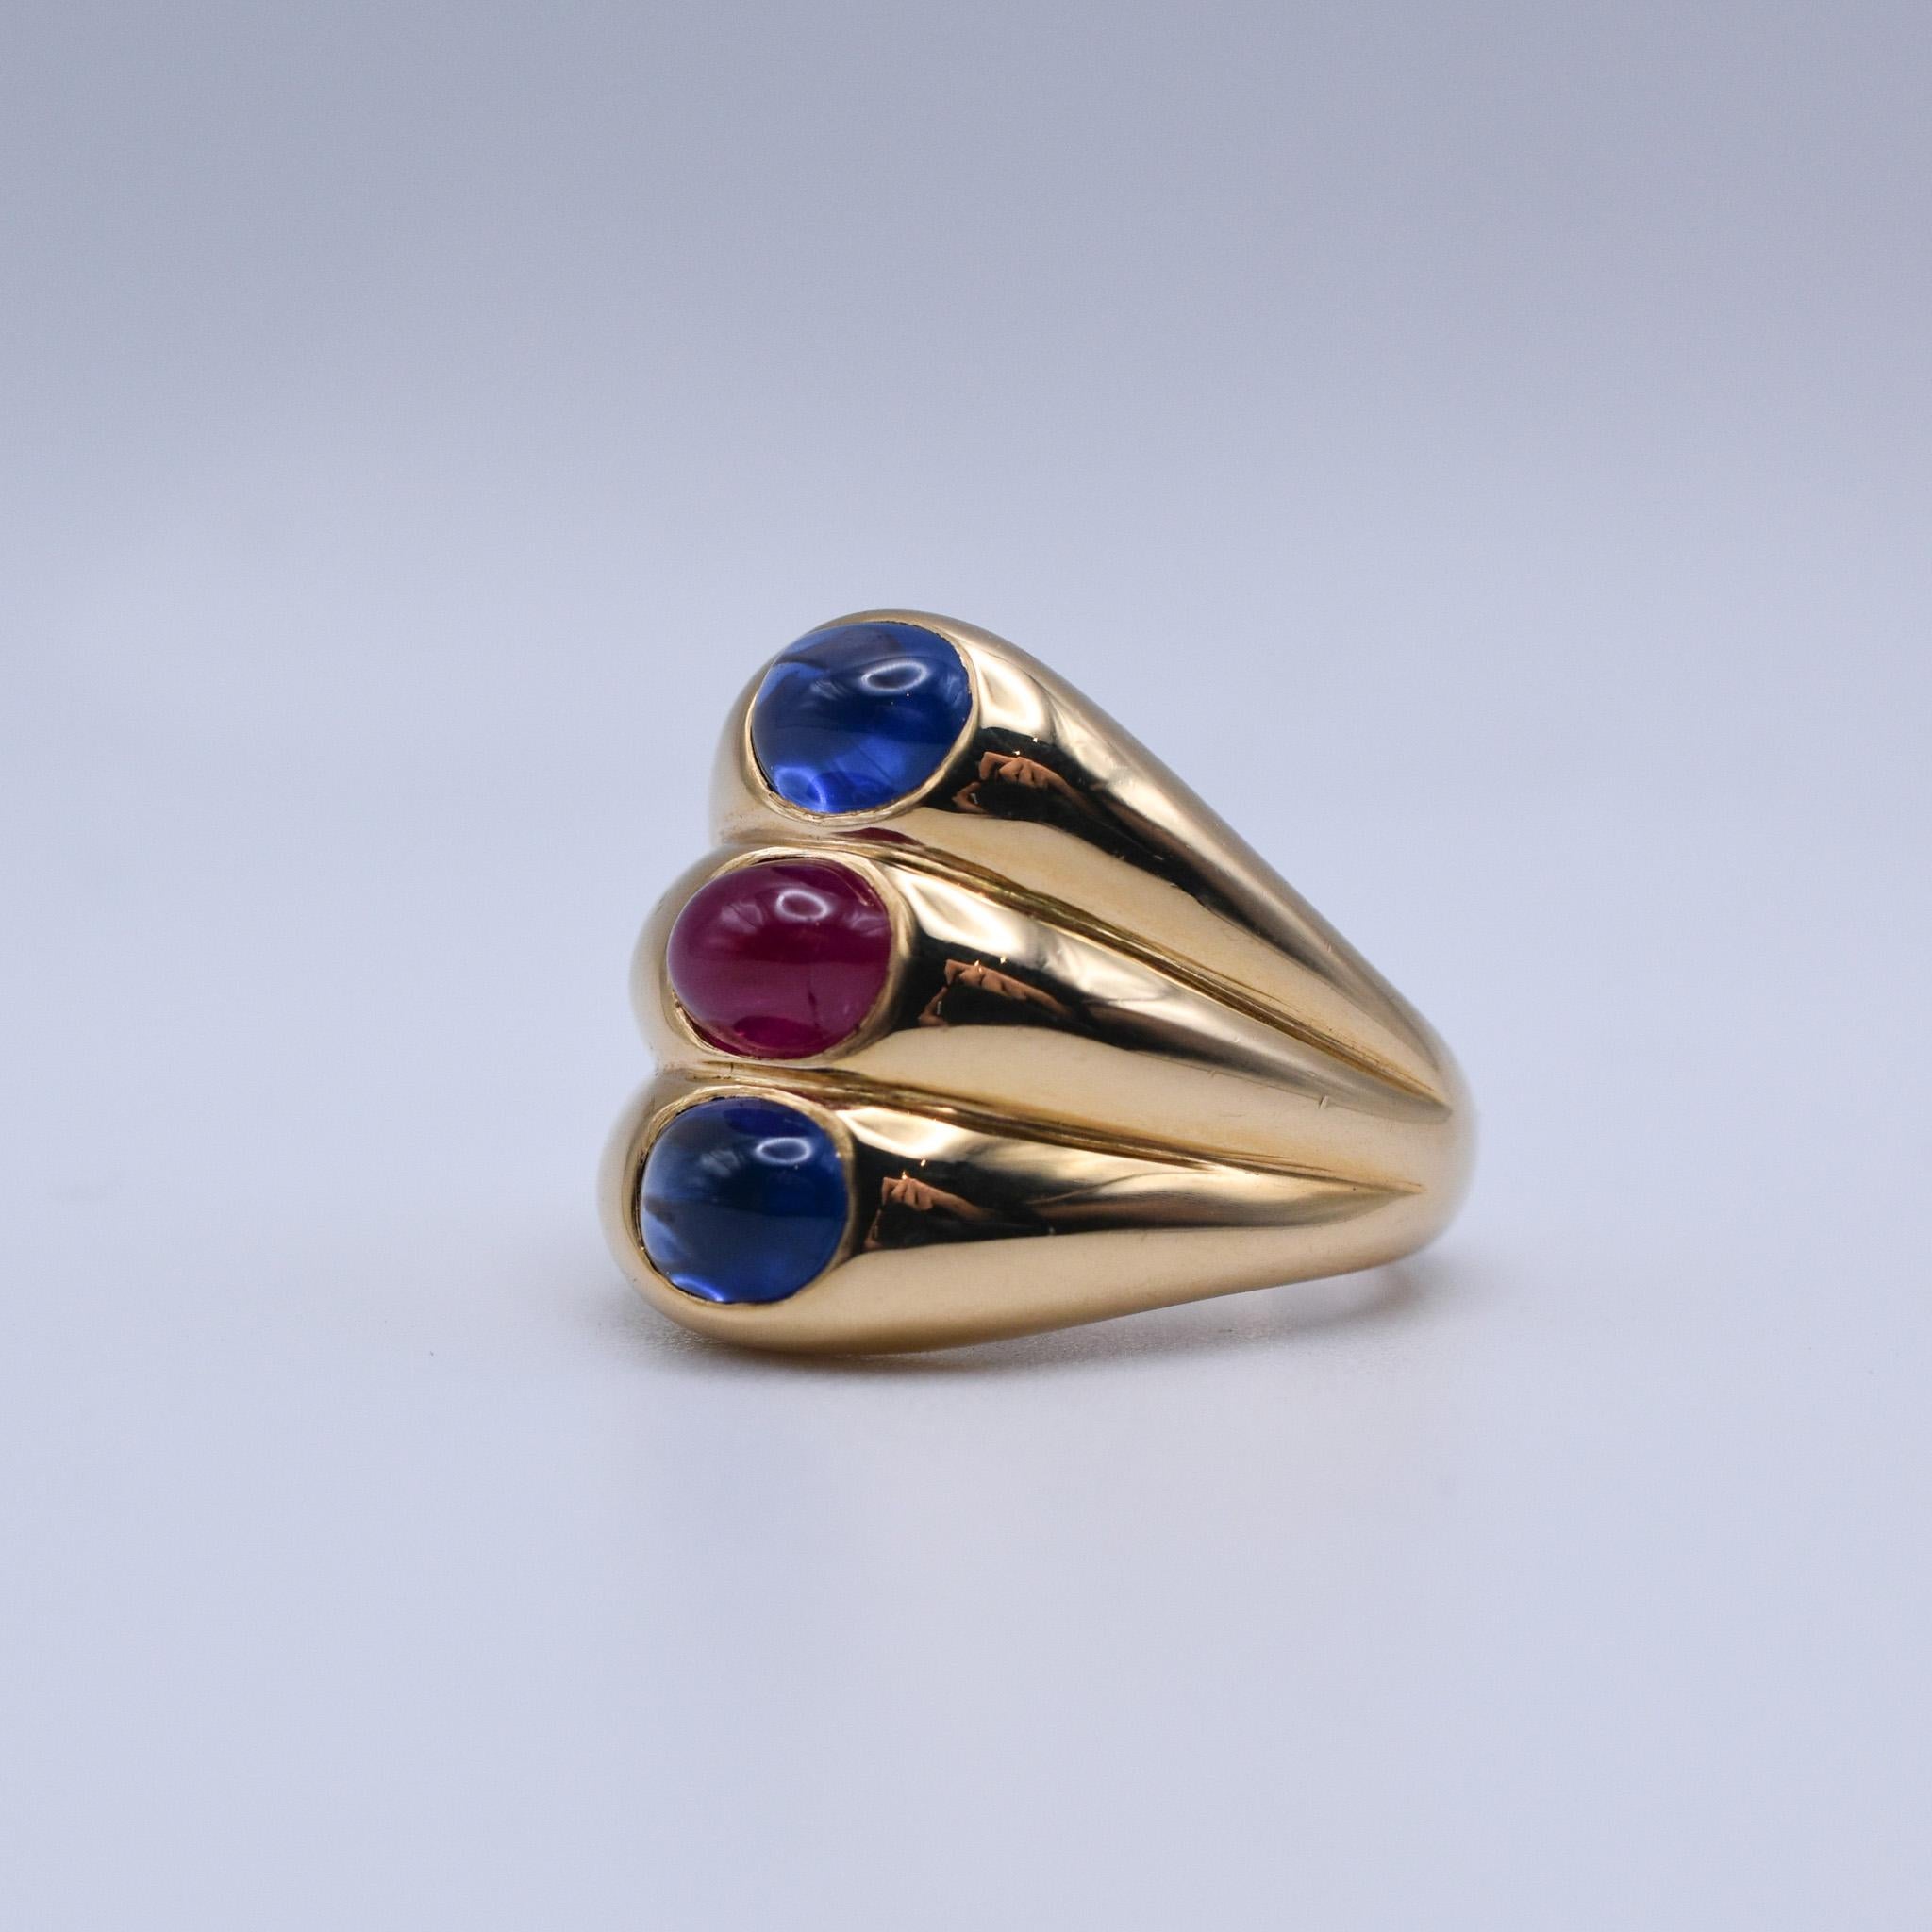 Bulgari Dome Shaped Ring crafted in 18k yellow gold, showcasing two blue cabochon sapphires and one cabochon ruby. Made in Italy, circa 1970.

Ring size: US 6.5